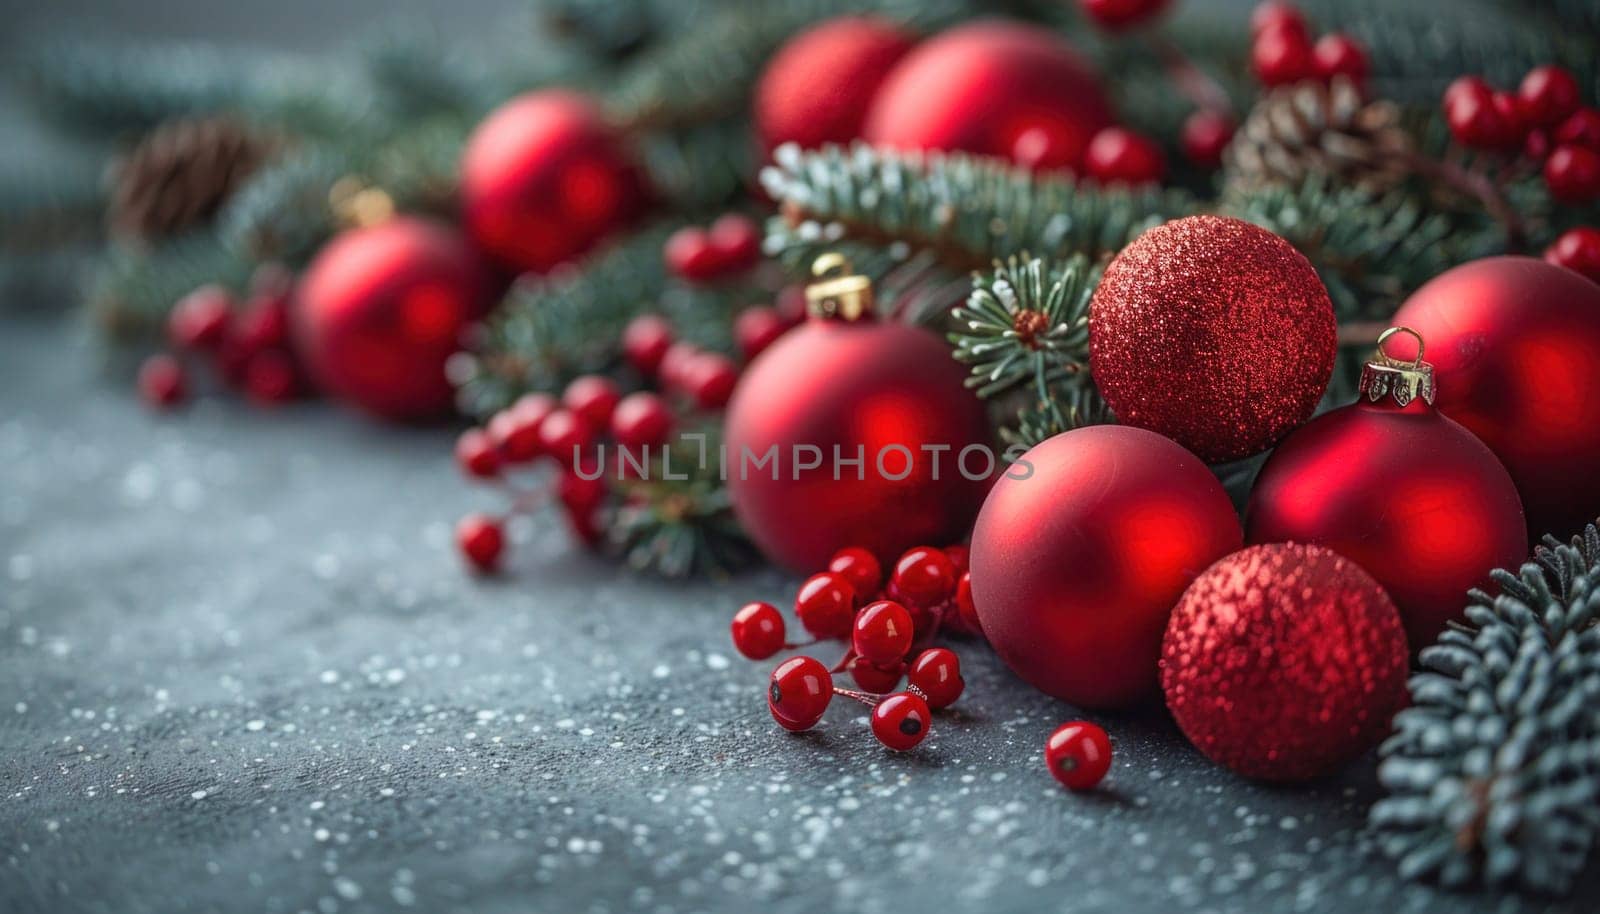 A selection of red Christmas ornaments, such as balls, berries, and pine cones, artfully displayed on a tabletop